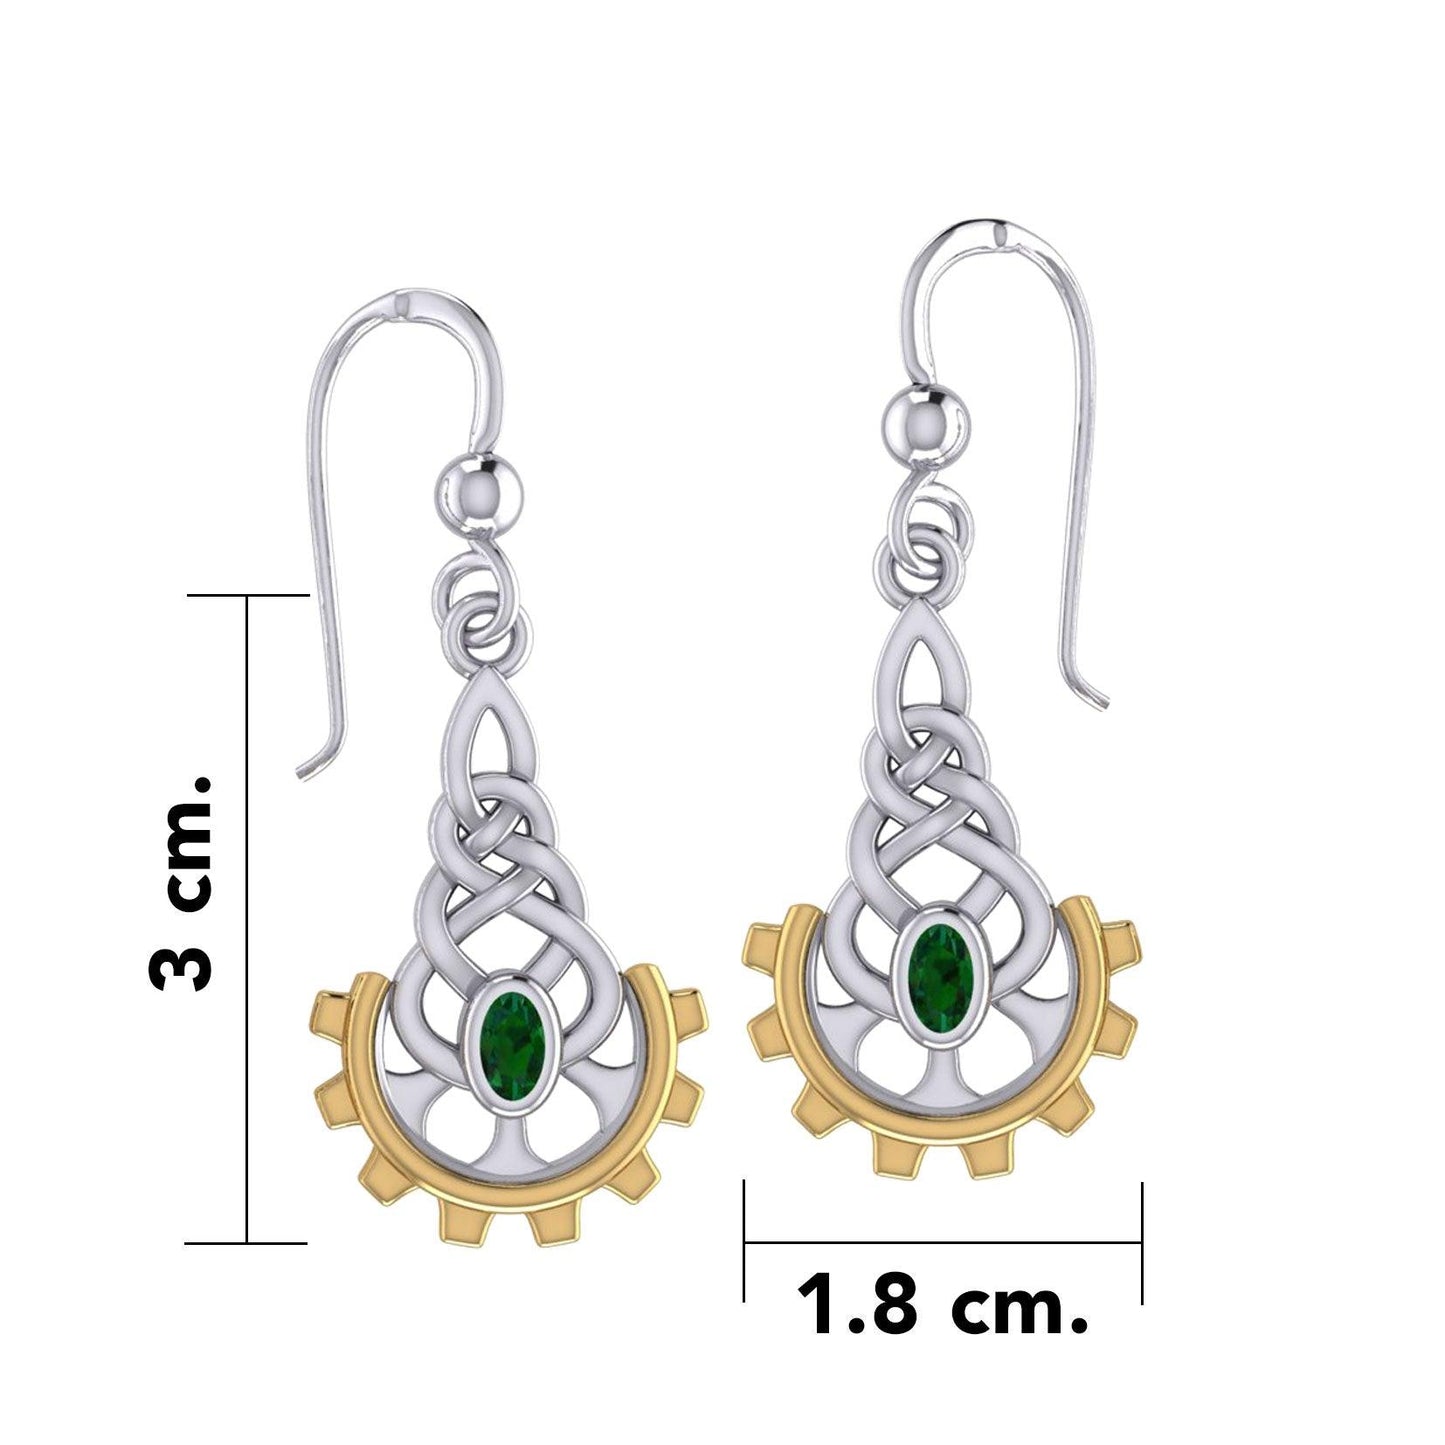 Steampunk Celtic Silver and Gold Accent Earrings with Gemstone MER2116 - peterstone.dropshipping